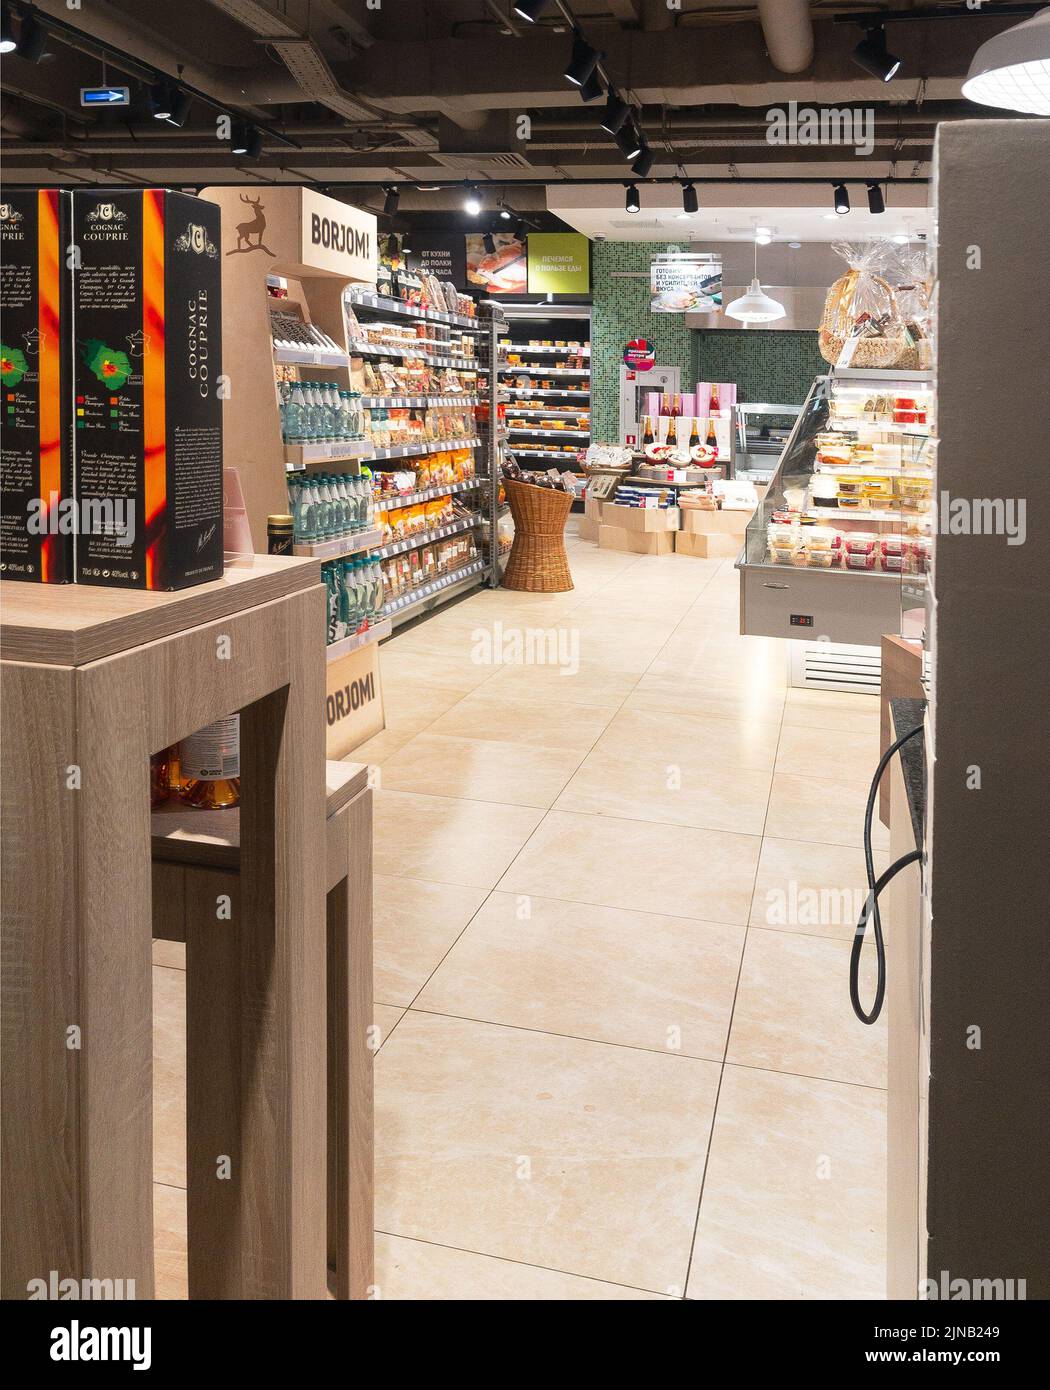 2022: interior of grocery store Stock Photo